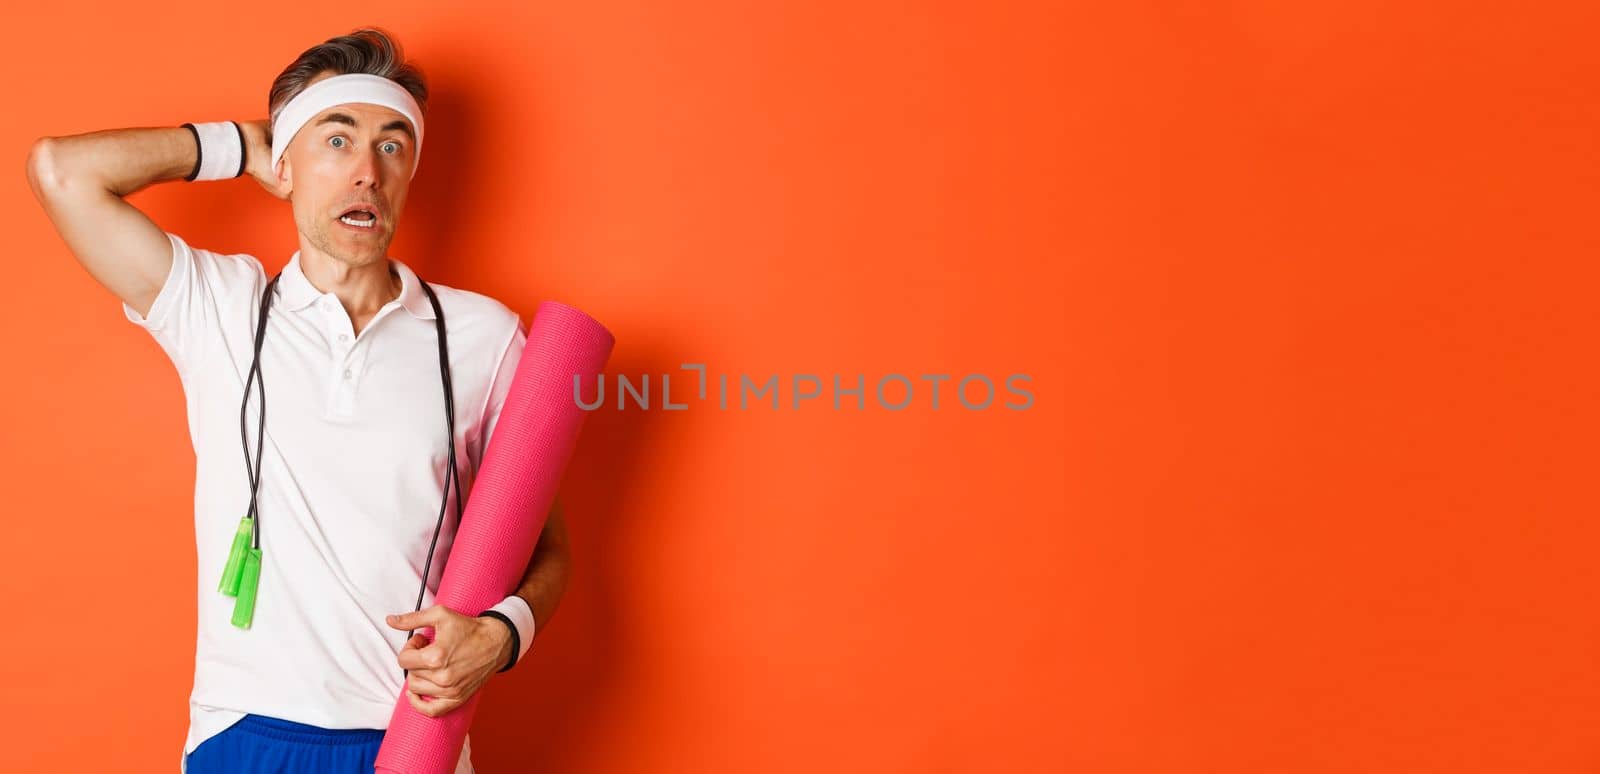 Concept of workout, gym and lifestyle. Image of awkward middle-aged athlete, looking confused, holding yoga mat and skipping rope, standing over orange background.